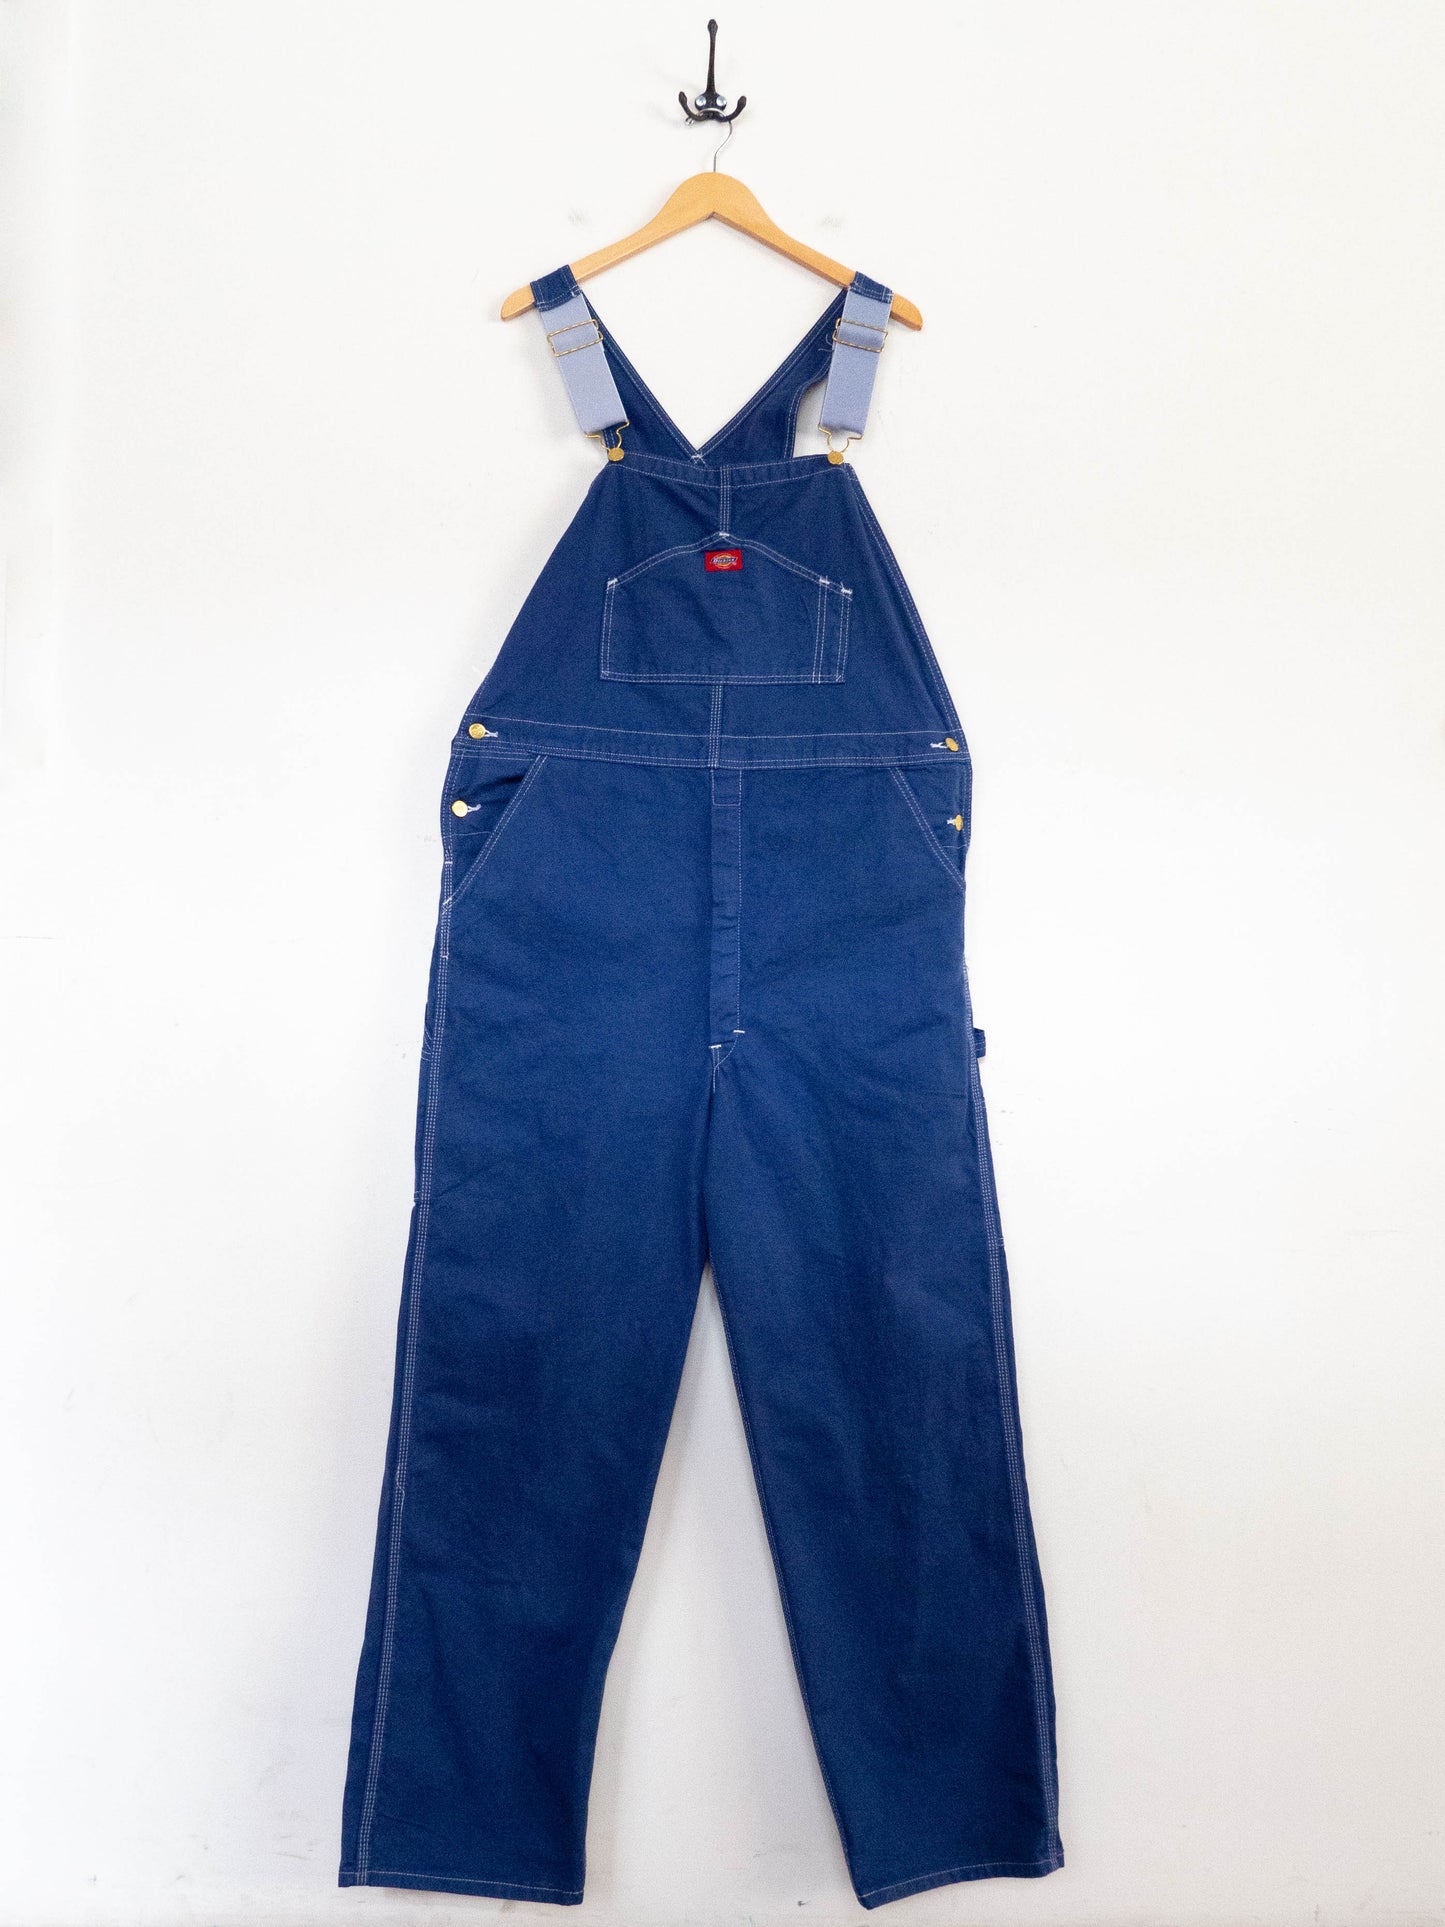 River Blue - Vintage Deadstock Dickies Overalls - (XL)